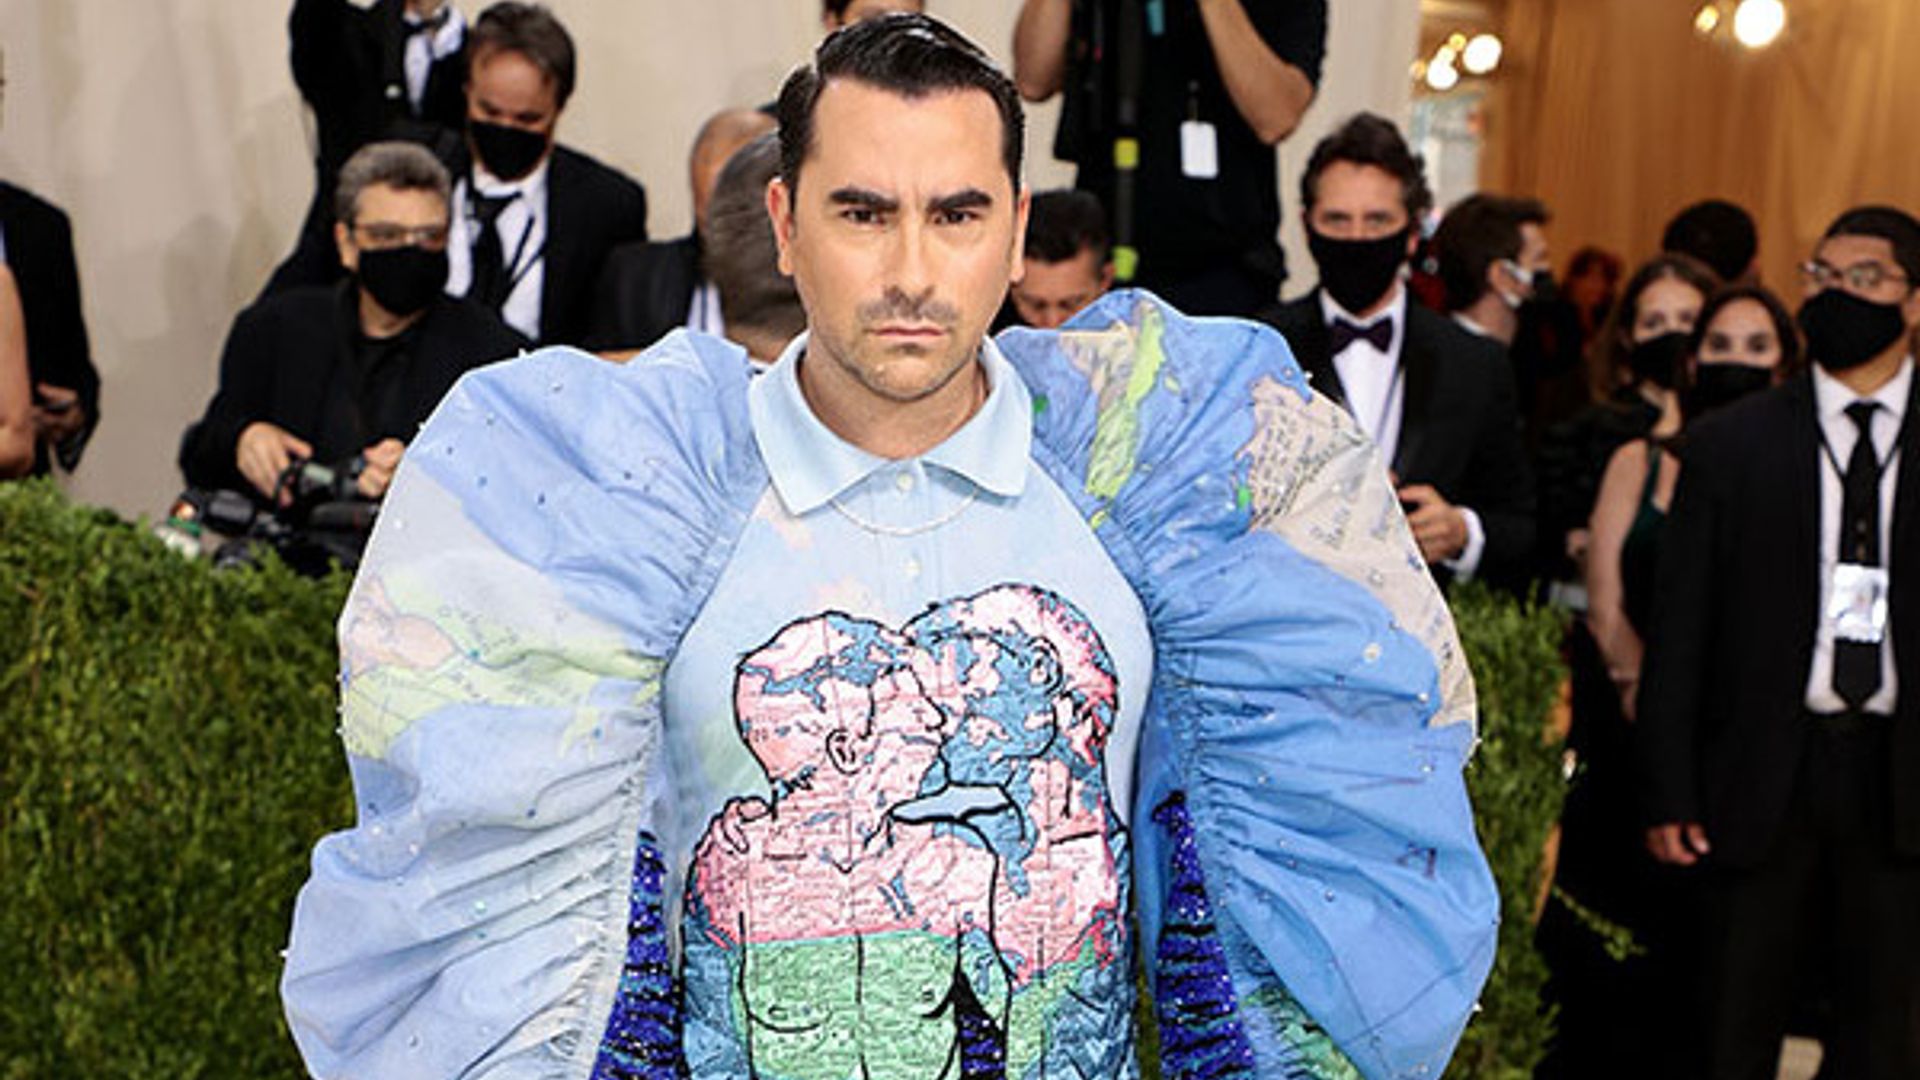 Dan Levy makes his Met Gala debut in poignant outfit that celebrates LGBTQ+ love and resilience